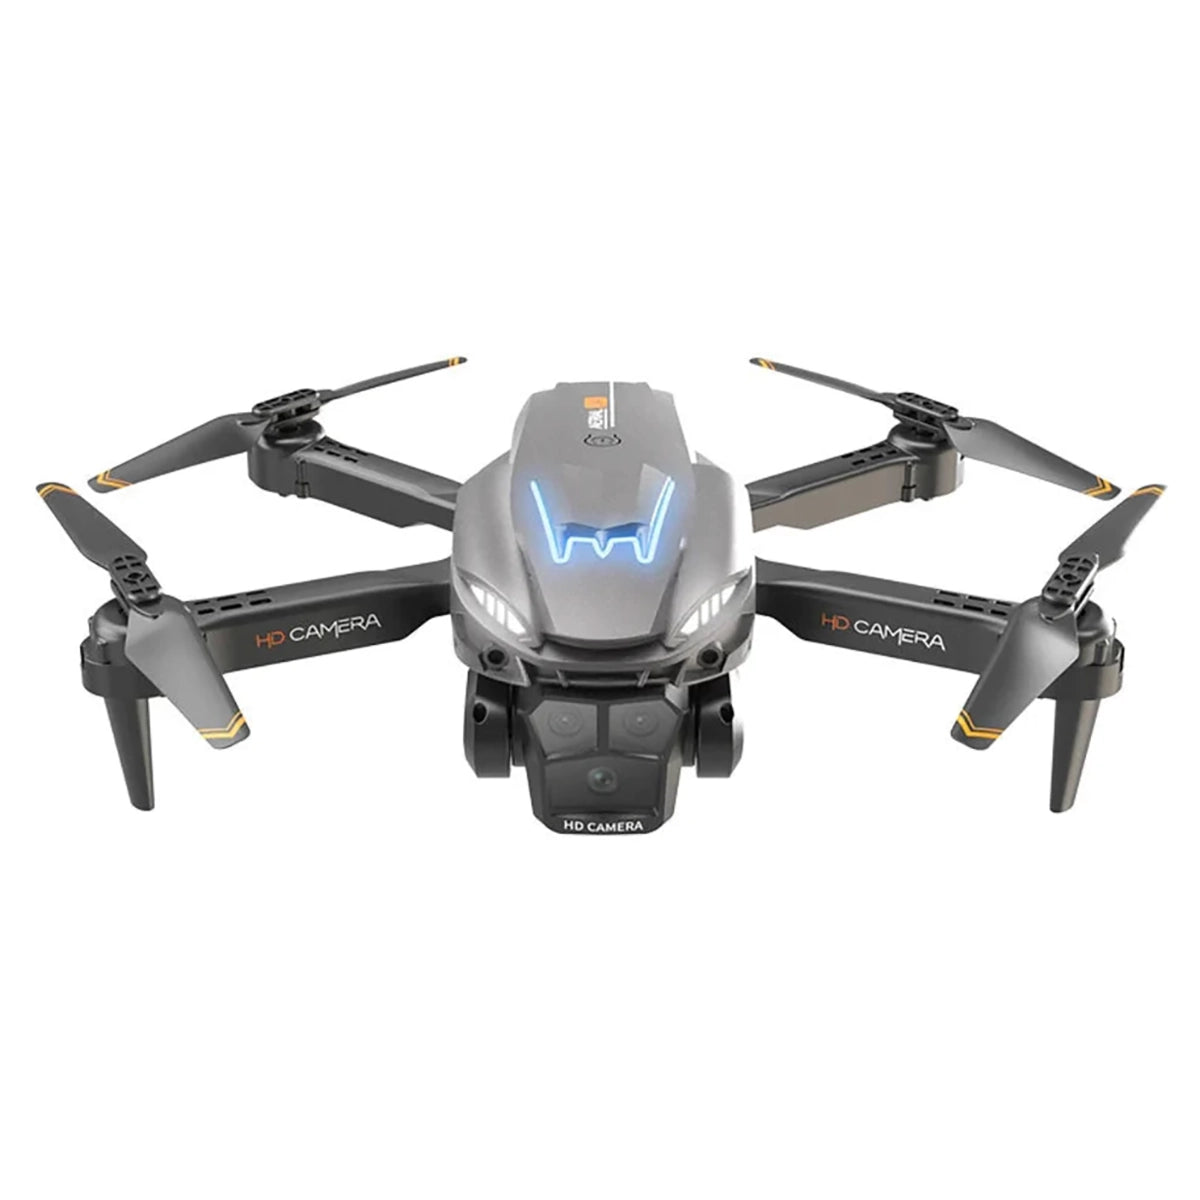 A16 MAX Drone - 4K Profesional GPS FPV Dual HD Camera Drones With Brushless Motor 5G WiFi RC Quadcopter Toys VS SG108 Pro KF102